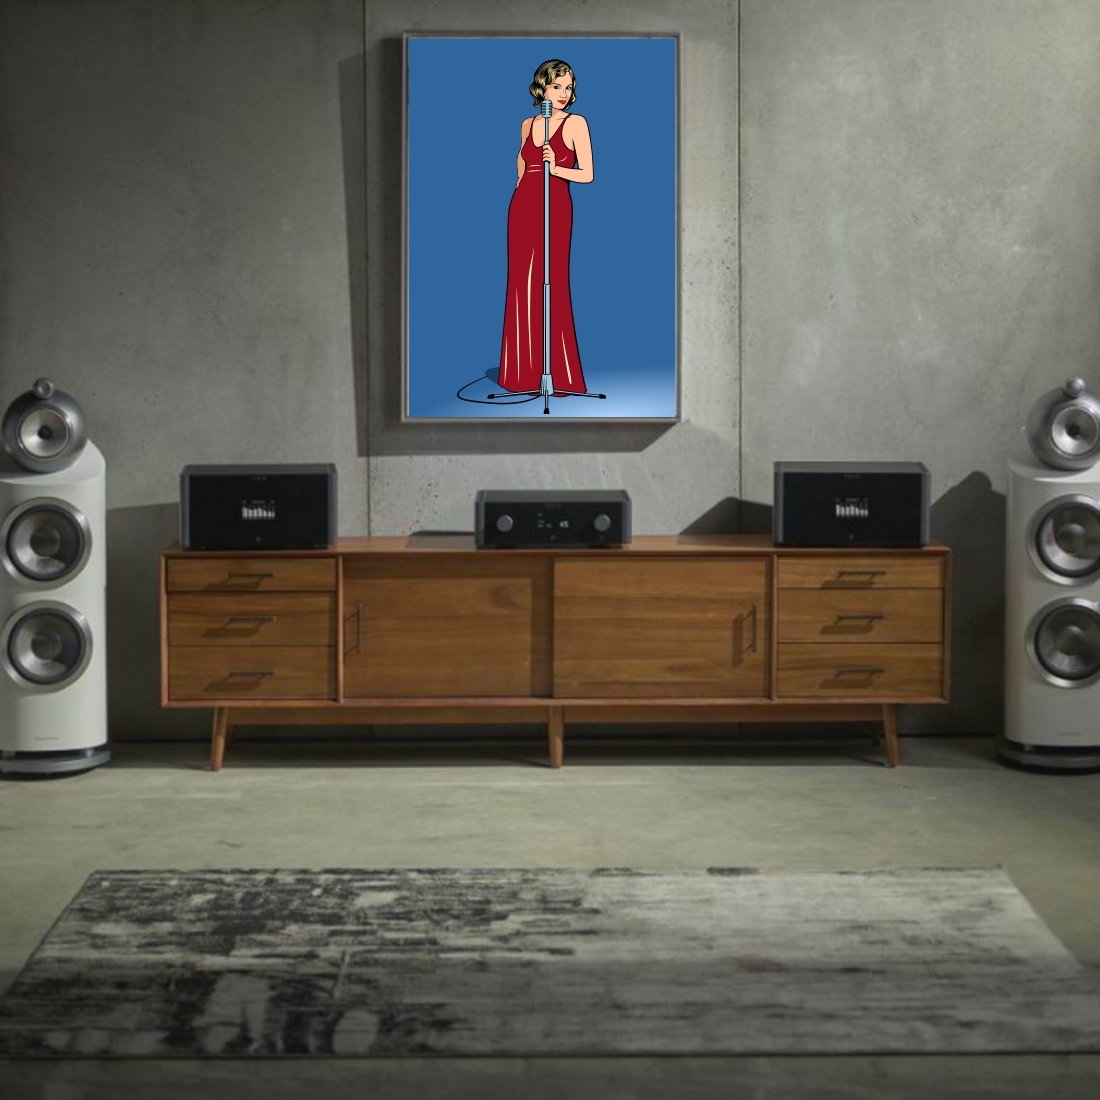 Painting of a woman in a red dress in a living room.